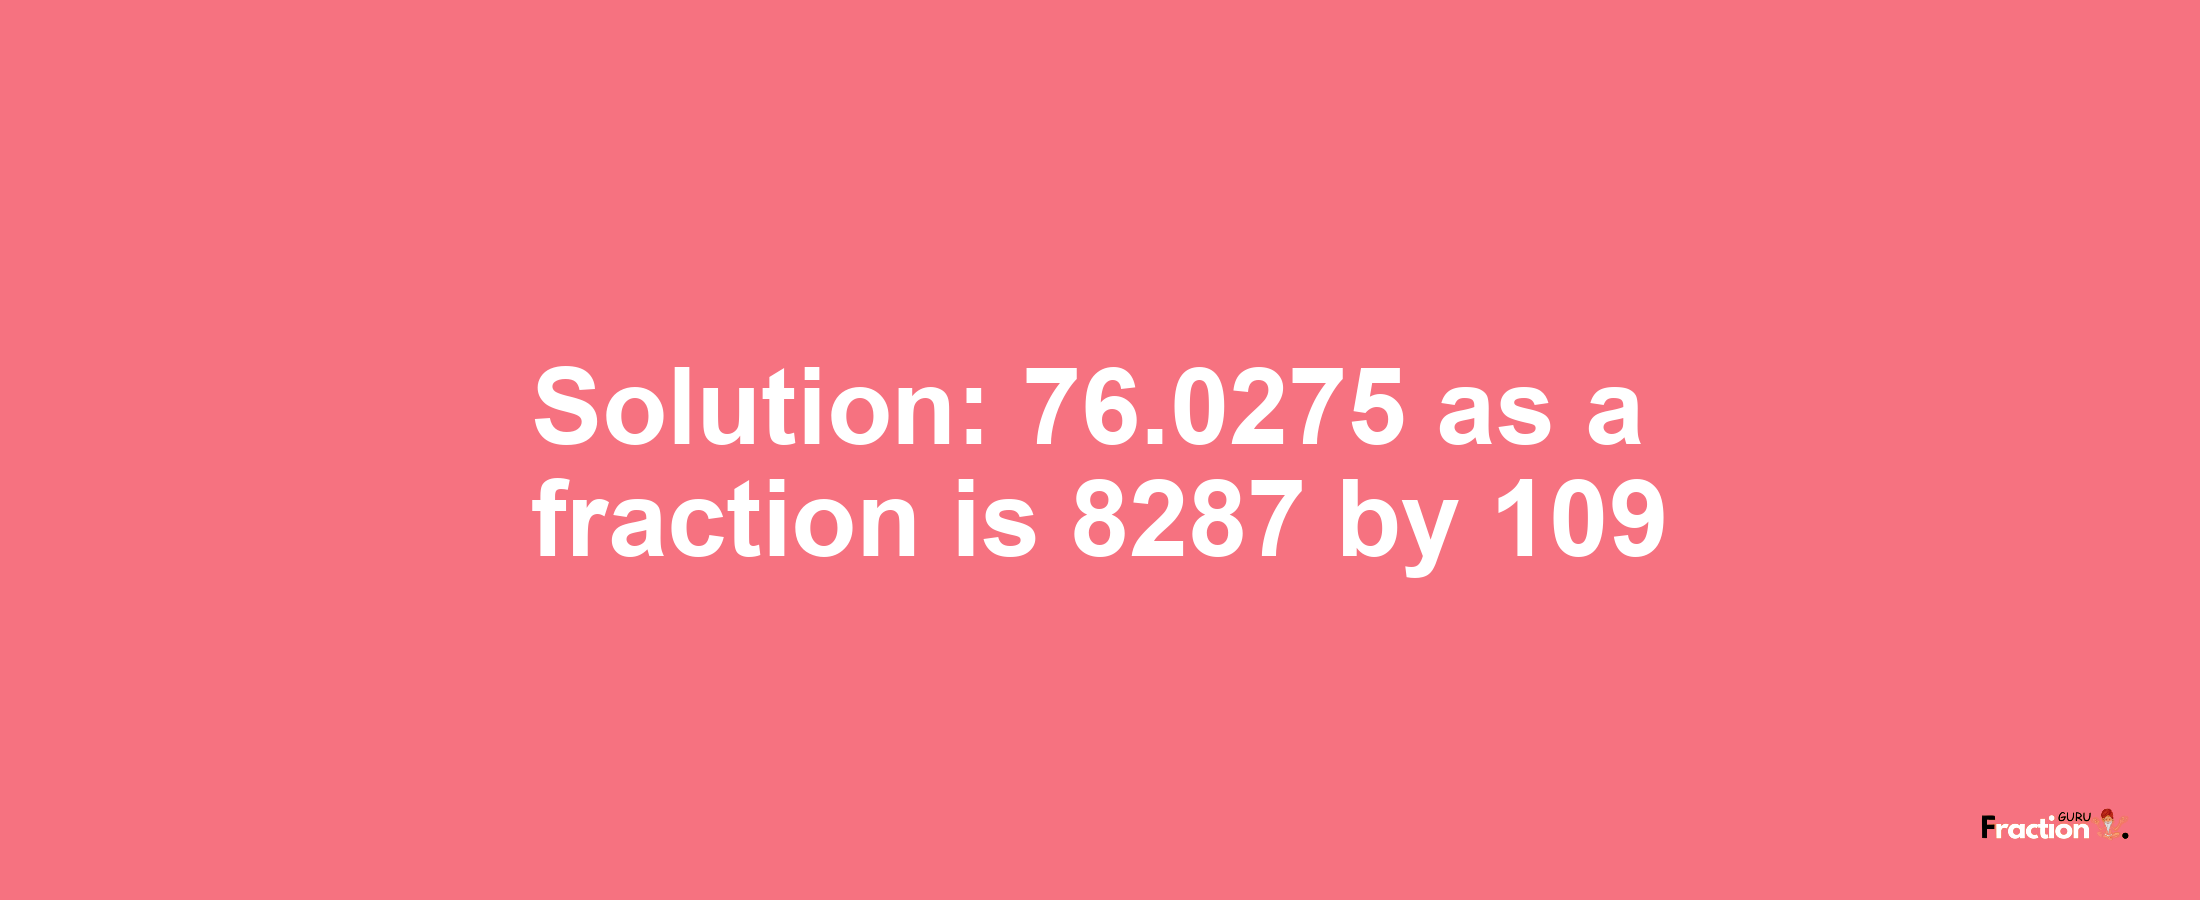 Solution:76.0275 as a fraction is 8287/109